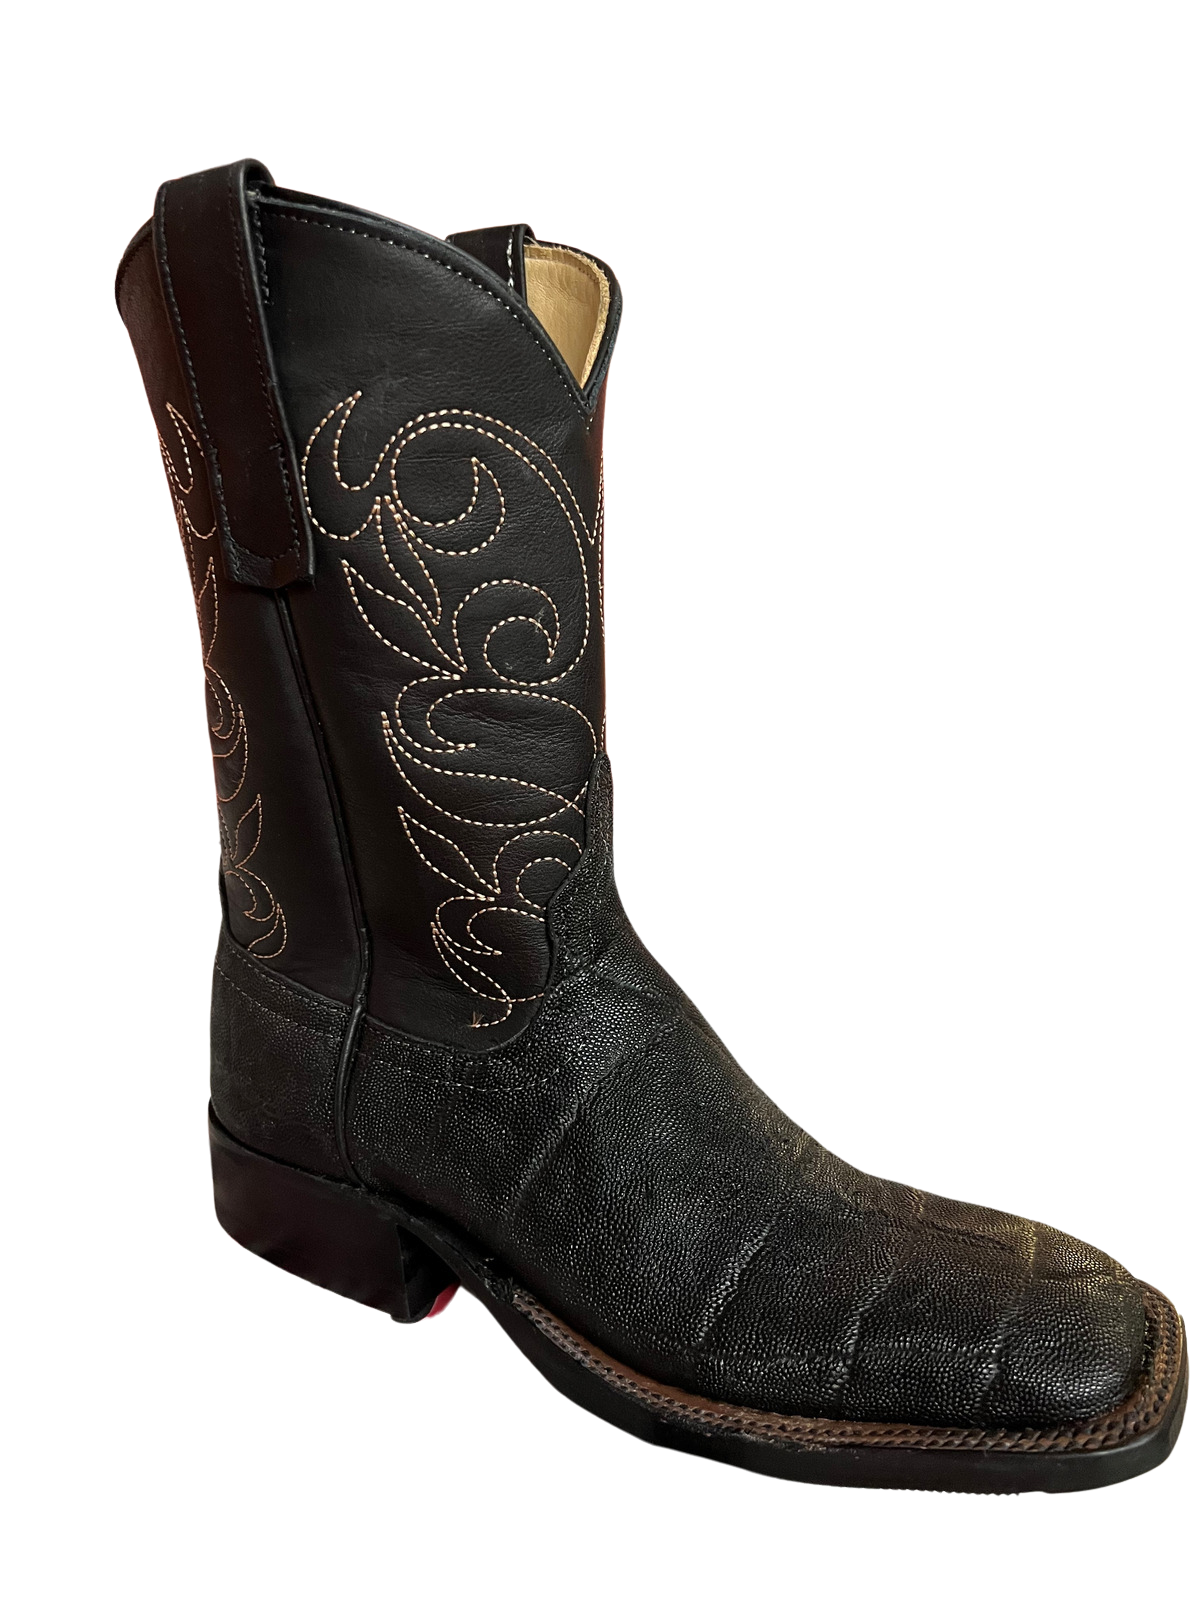 Adult Boots « Product categories « Logan Western Supply